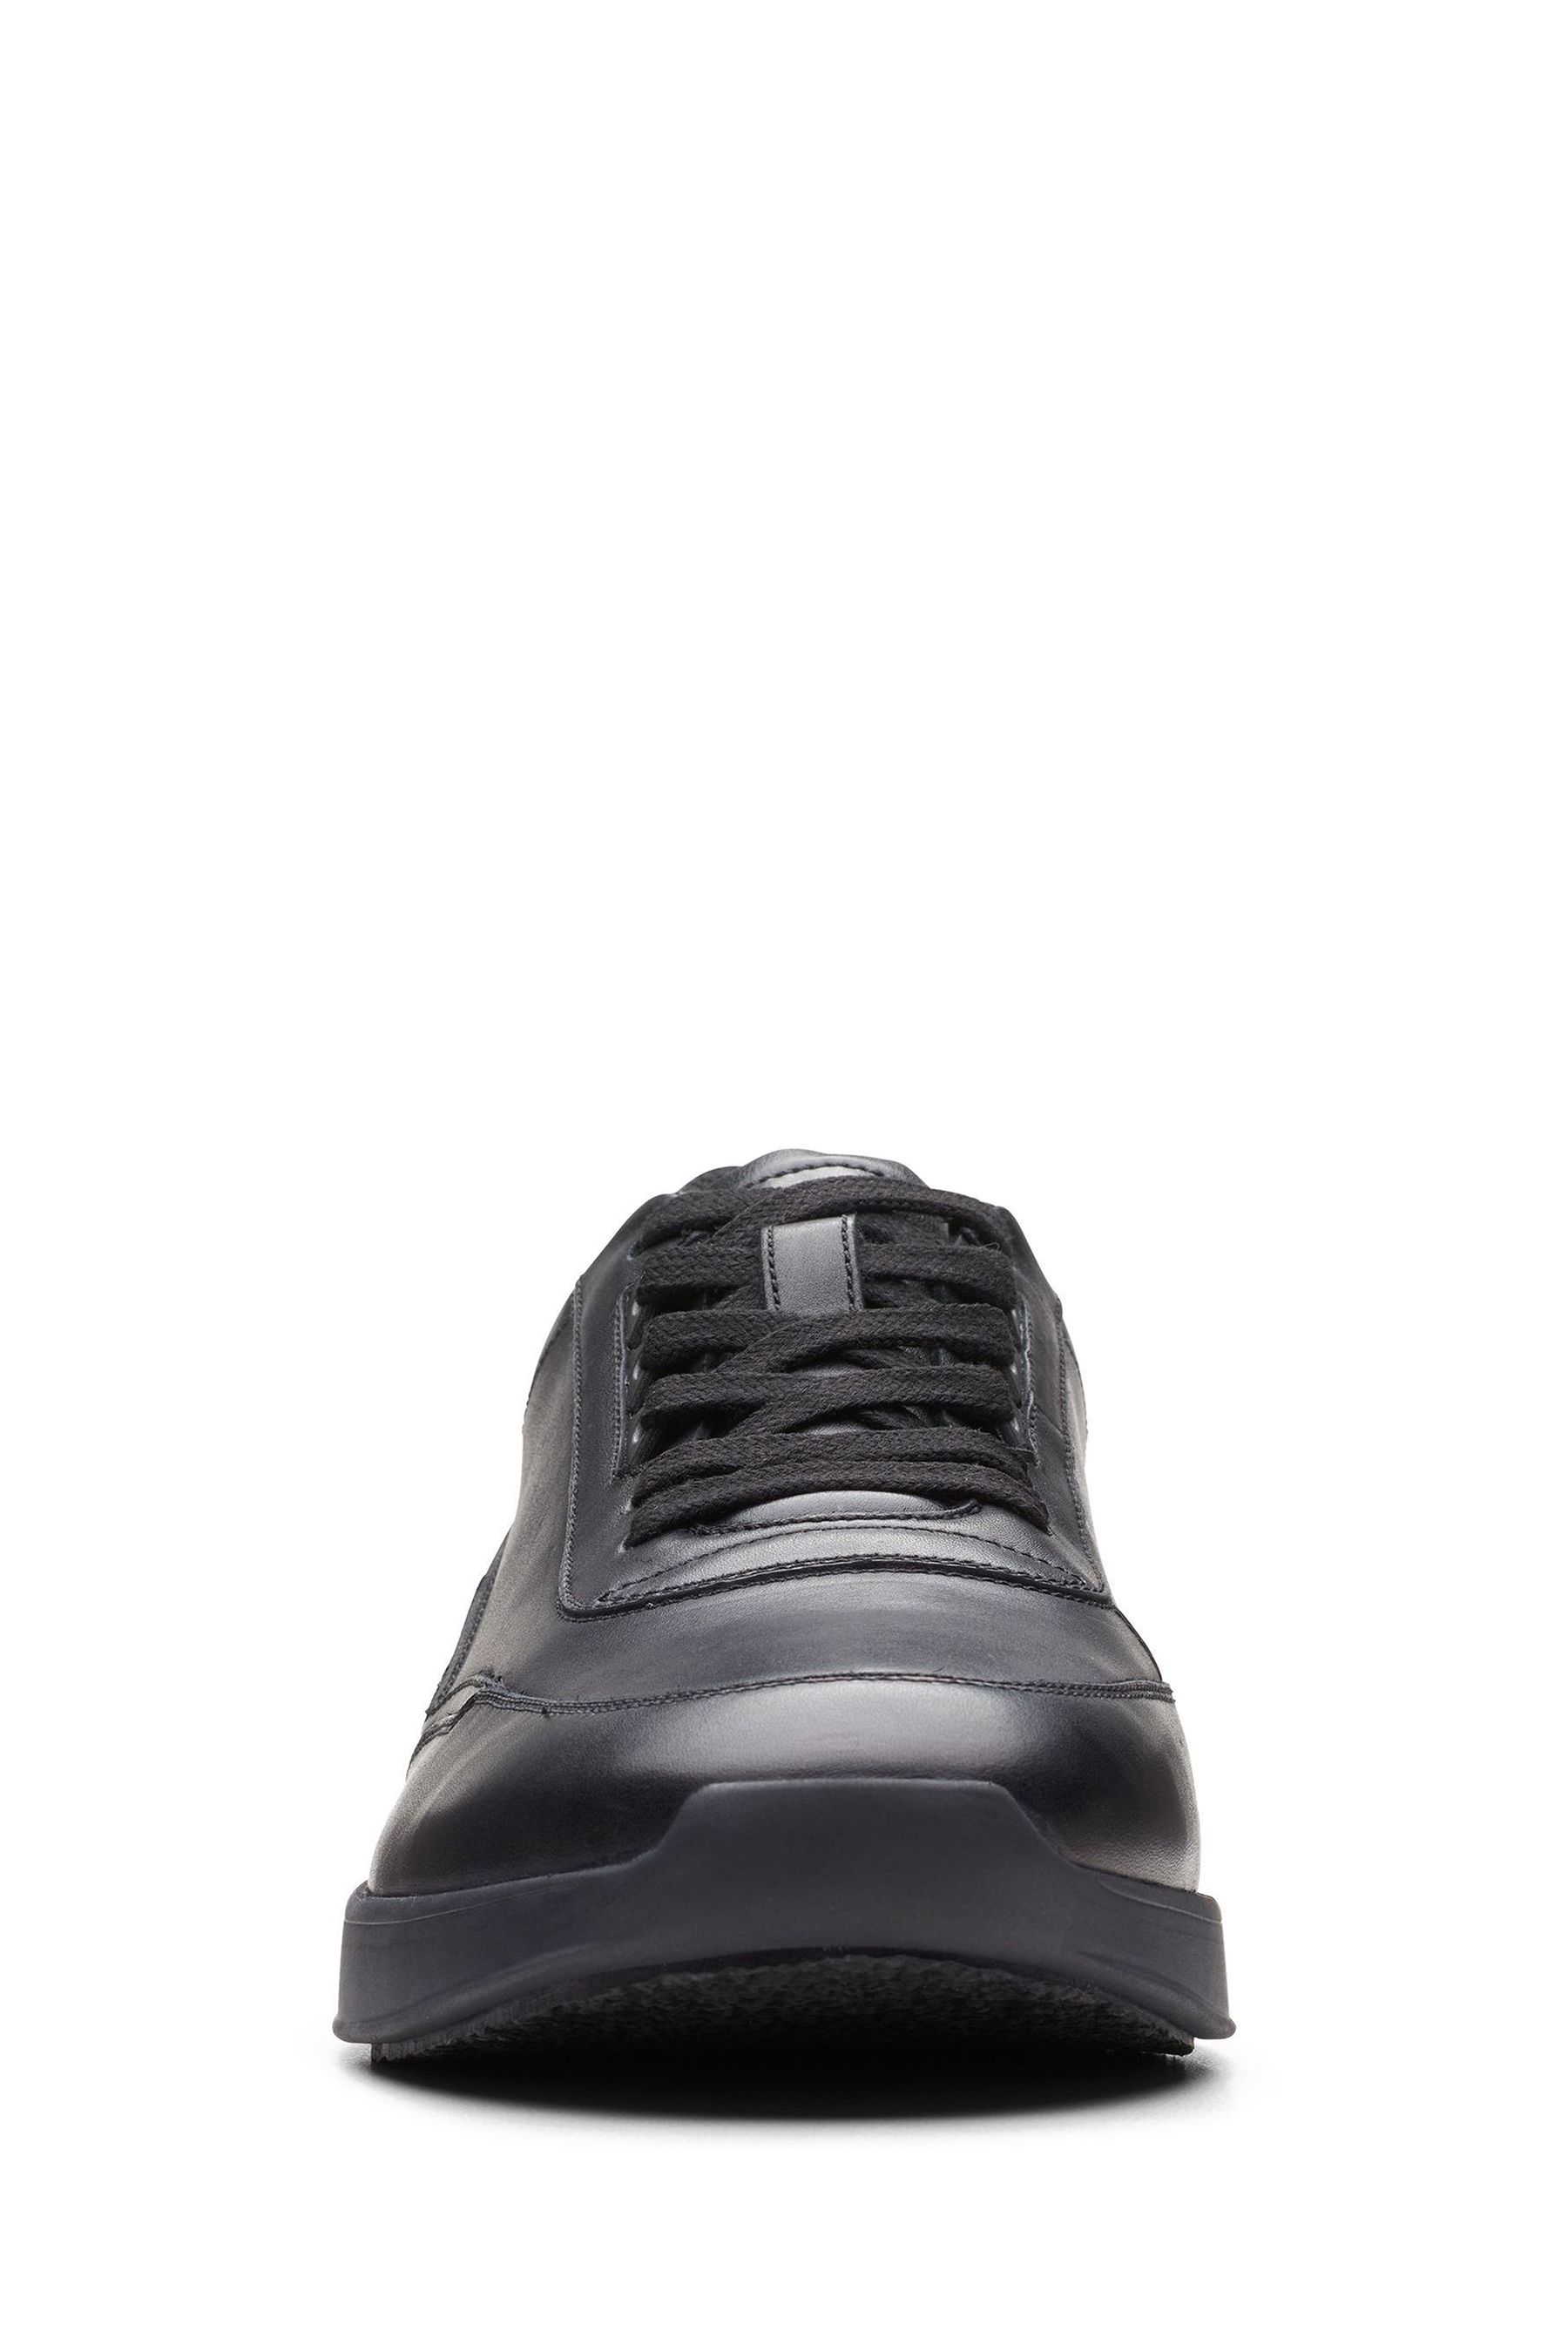 Buy Clarks Black Leather Racelite Lace Shoes from the Next UK online shop